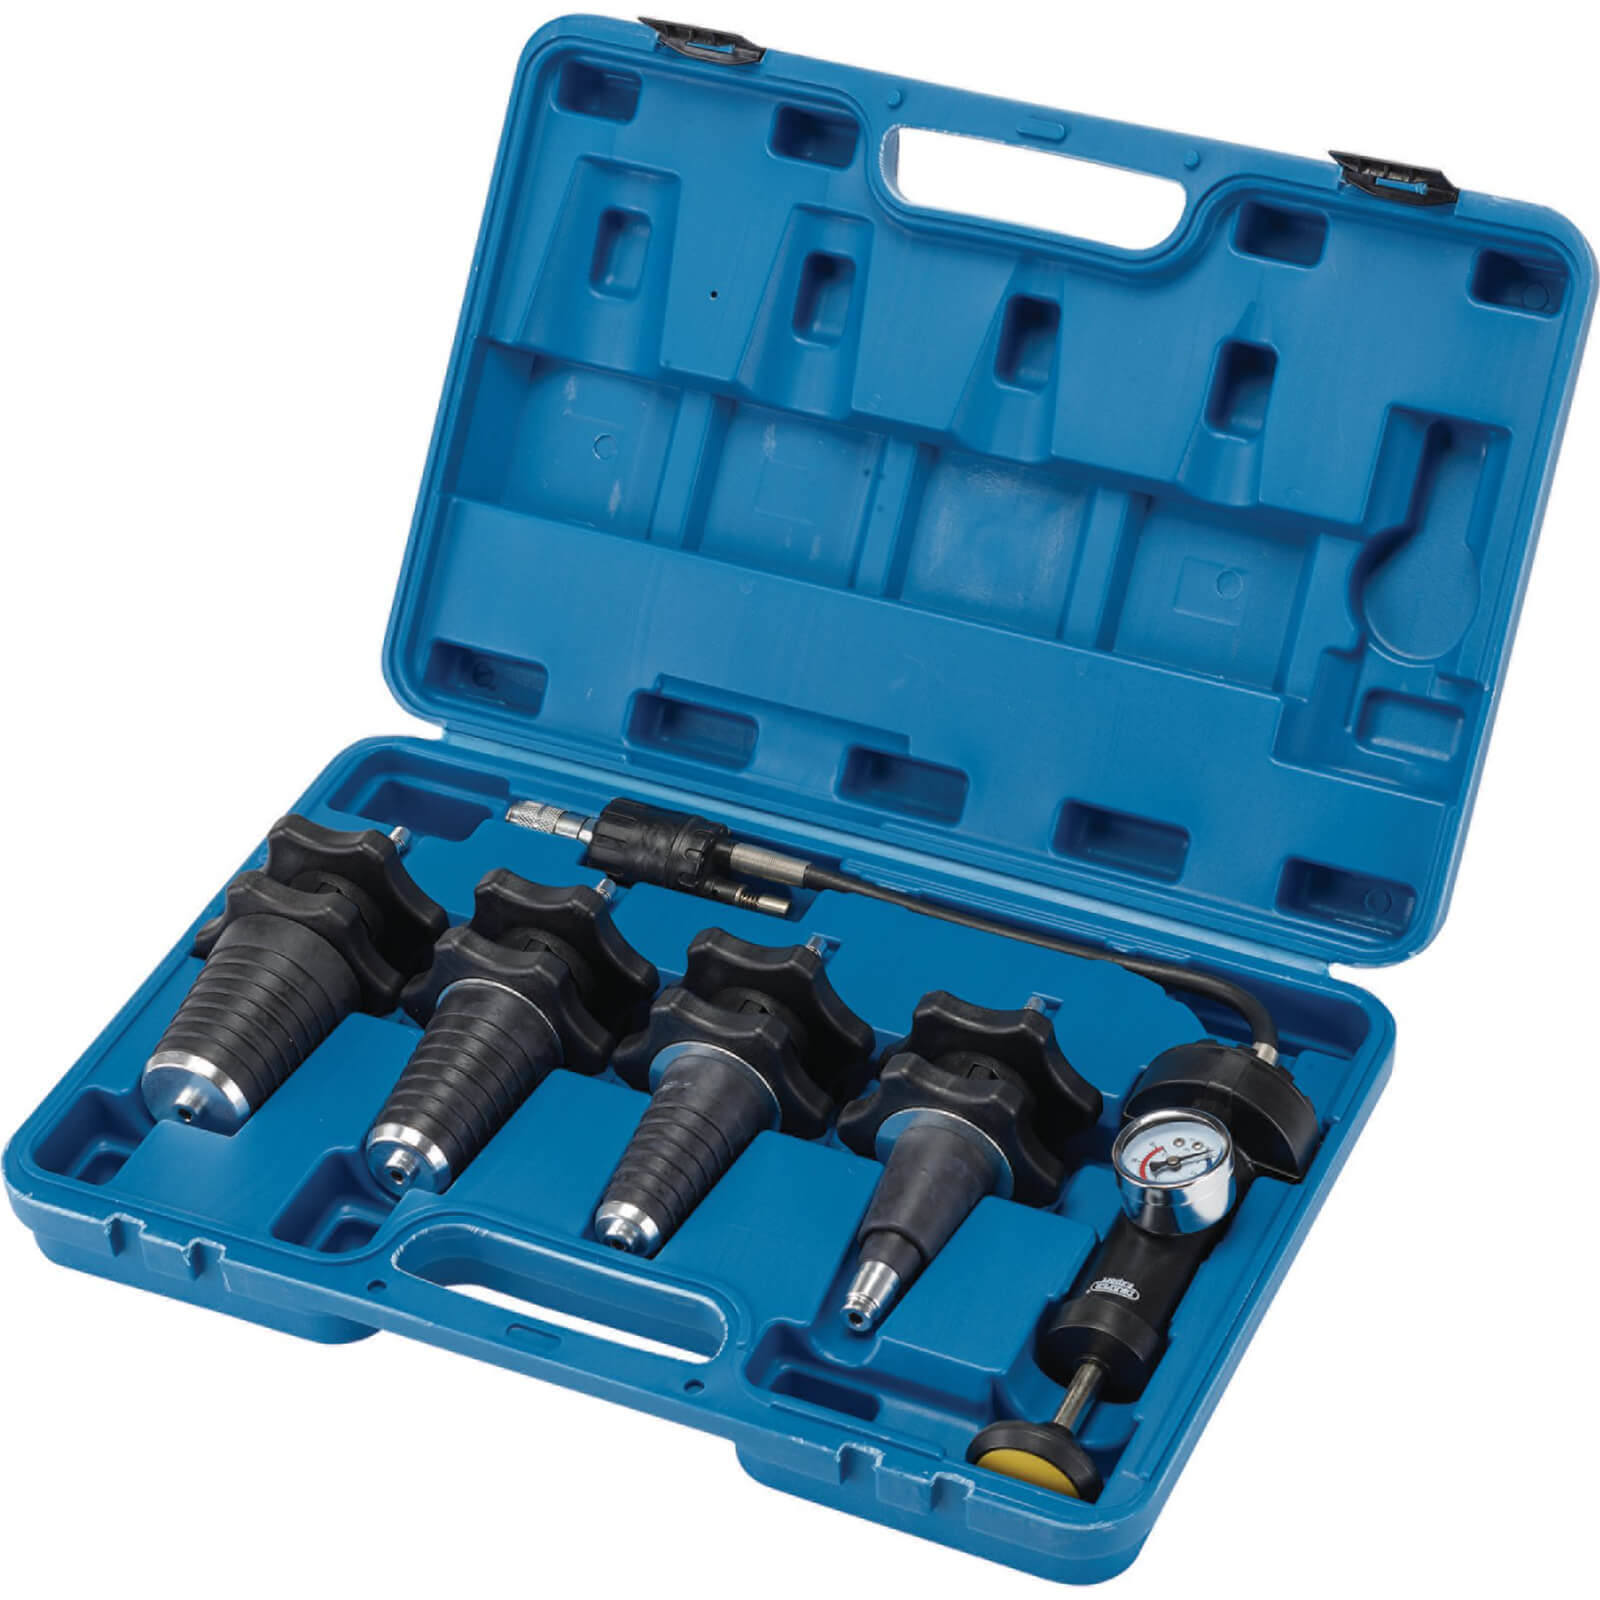 Image of Draper Expert 5 Piece Universal Cooling System Pressure Test Kit